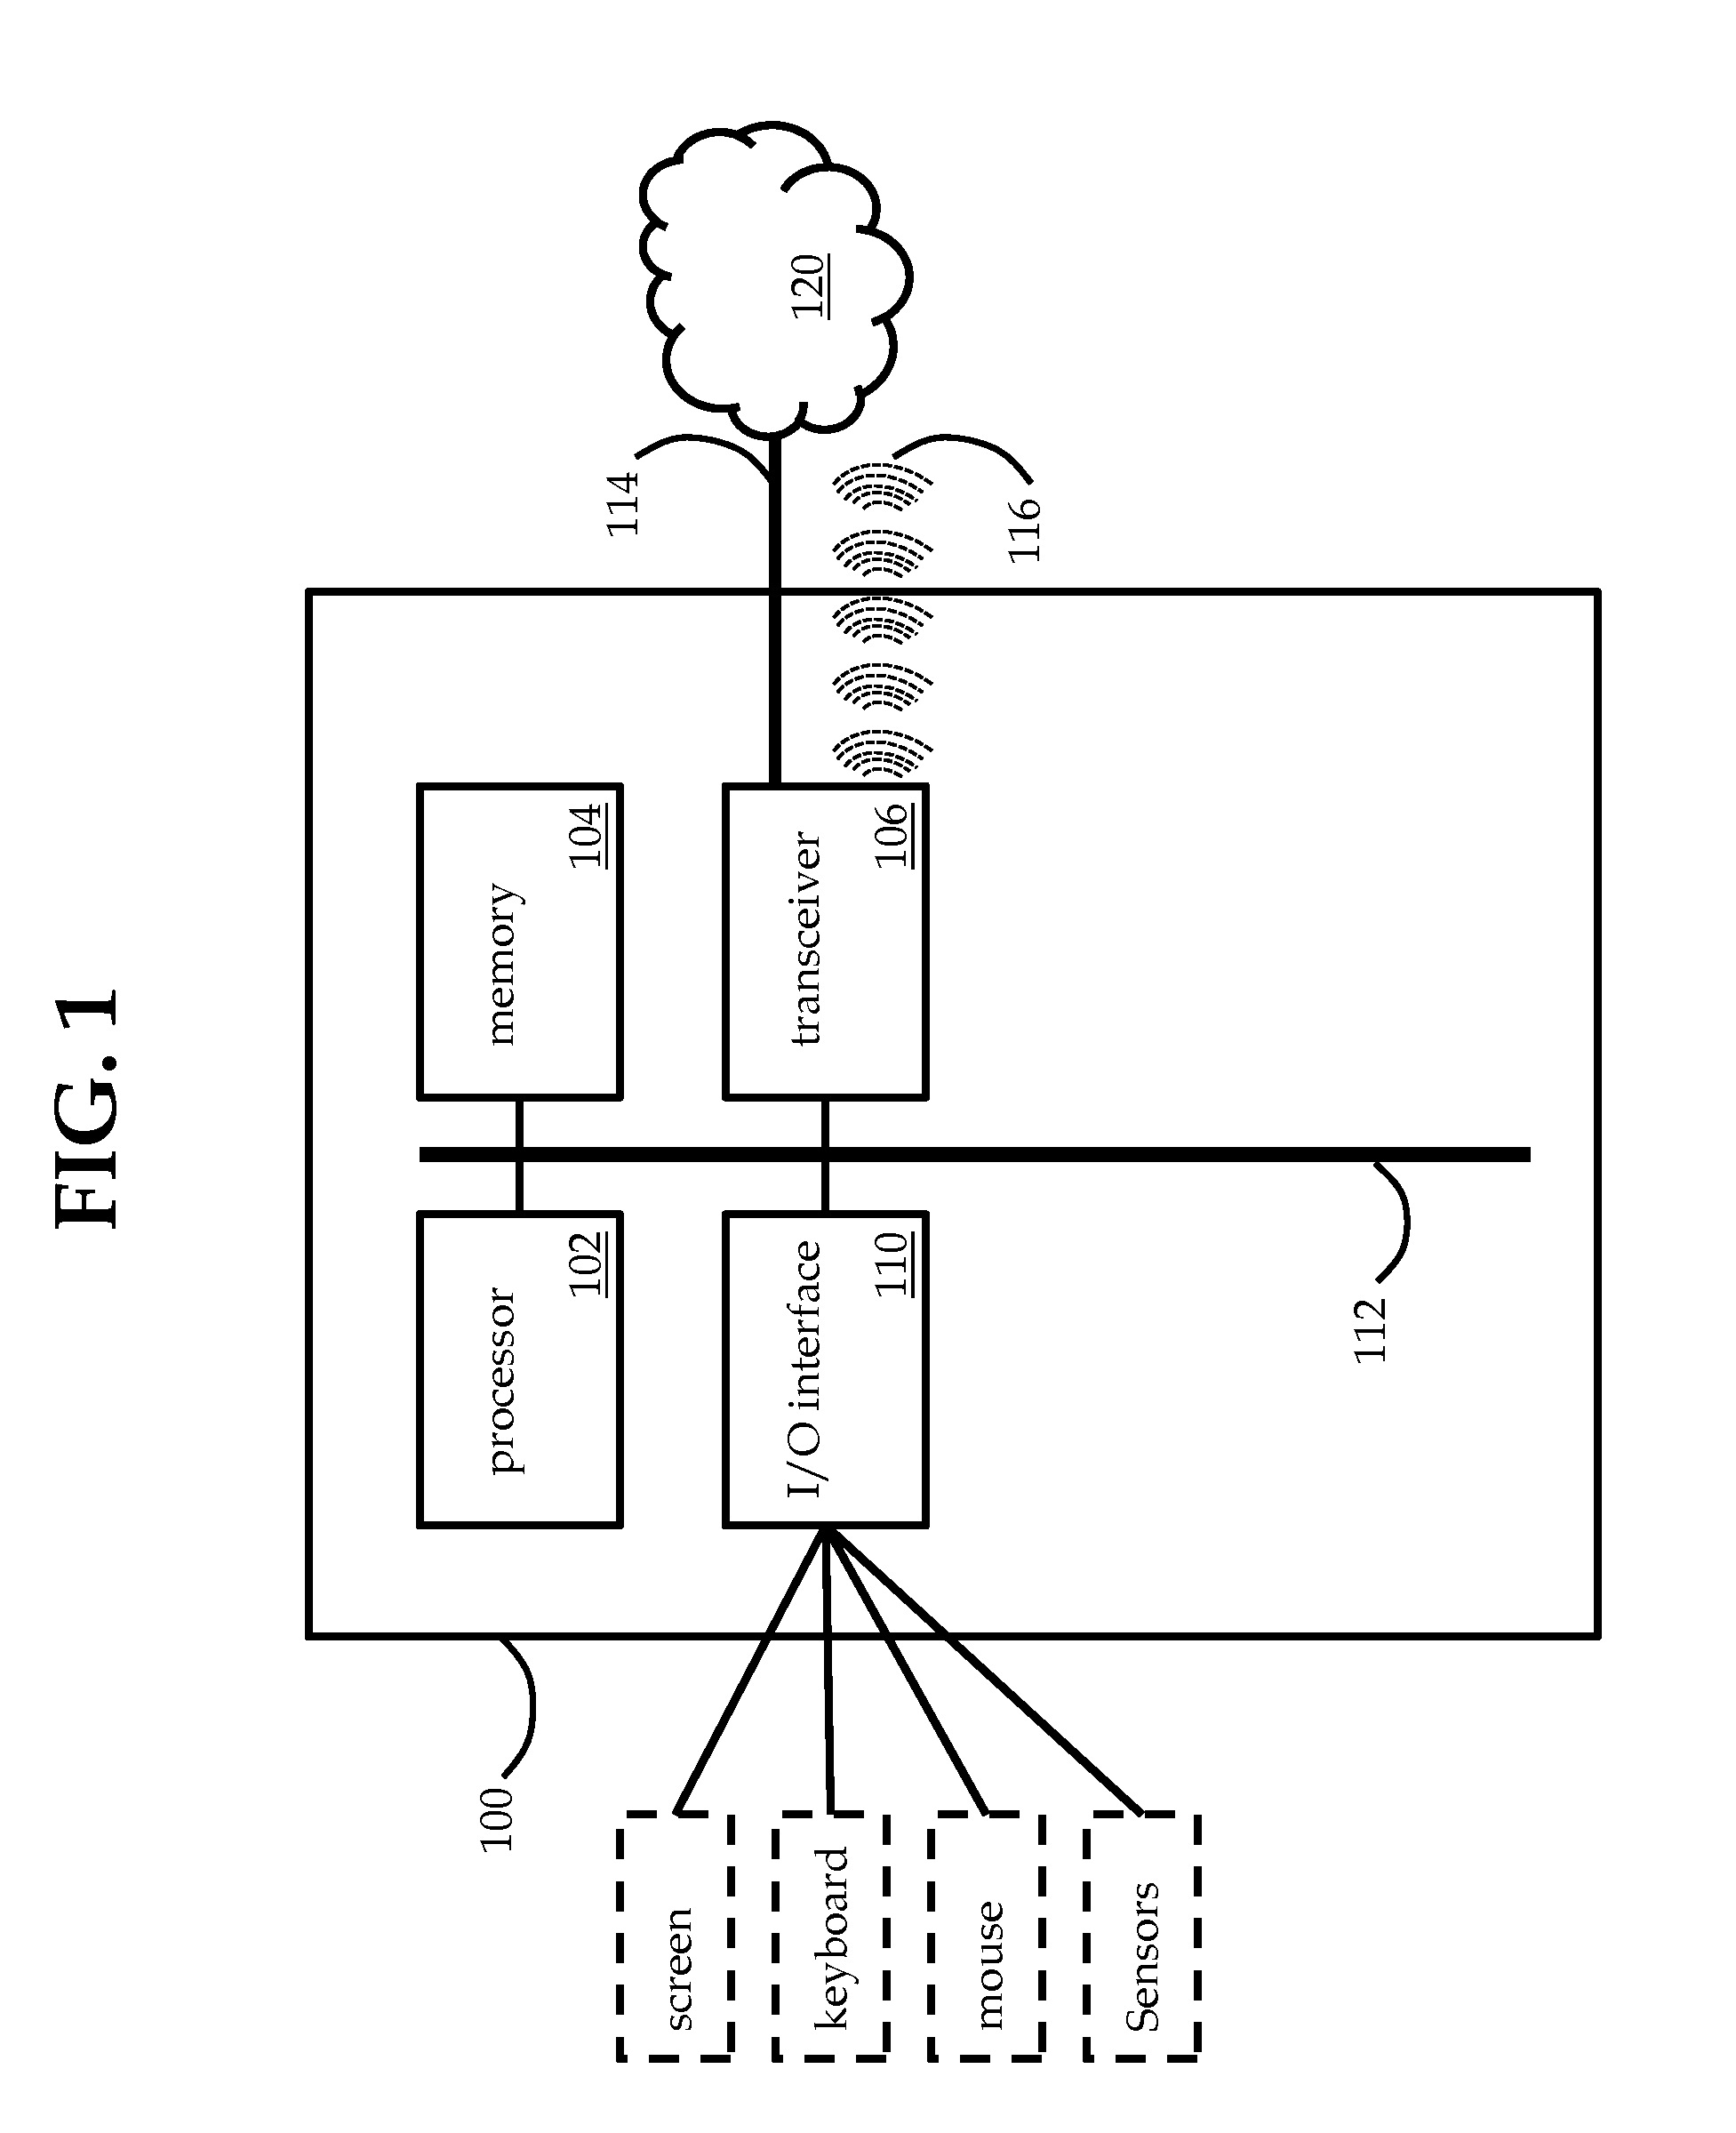 System and method for automatic language translation for applications